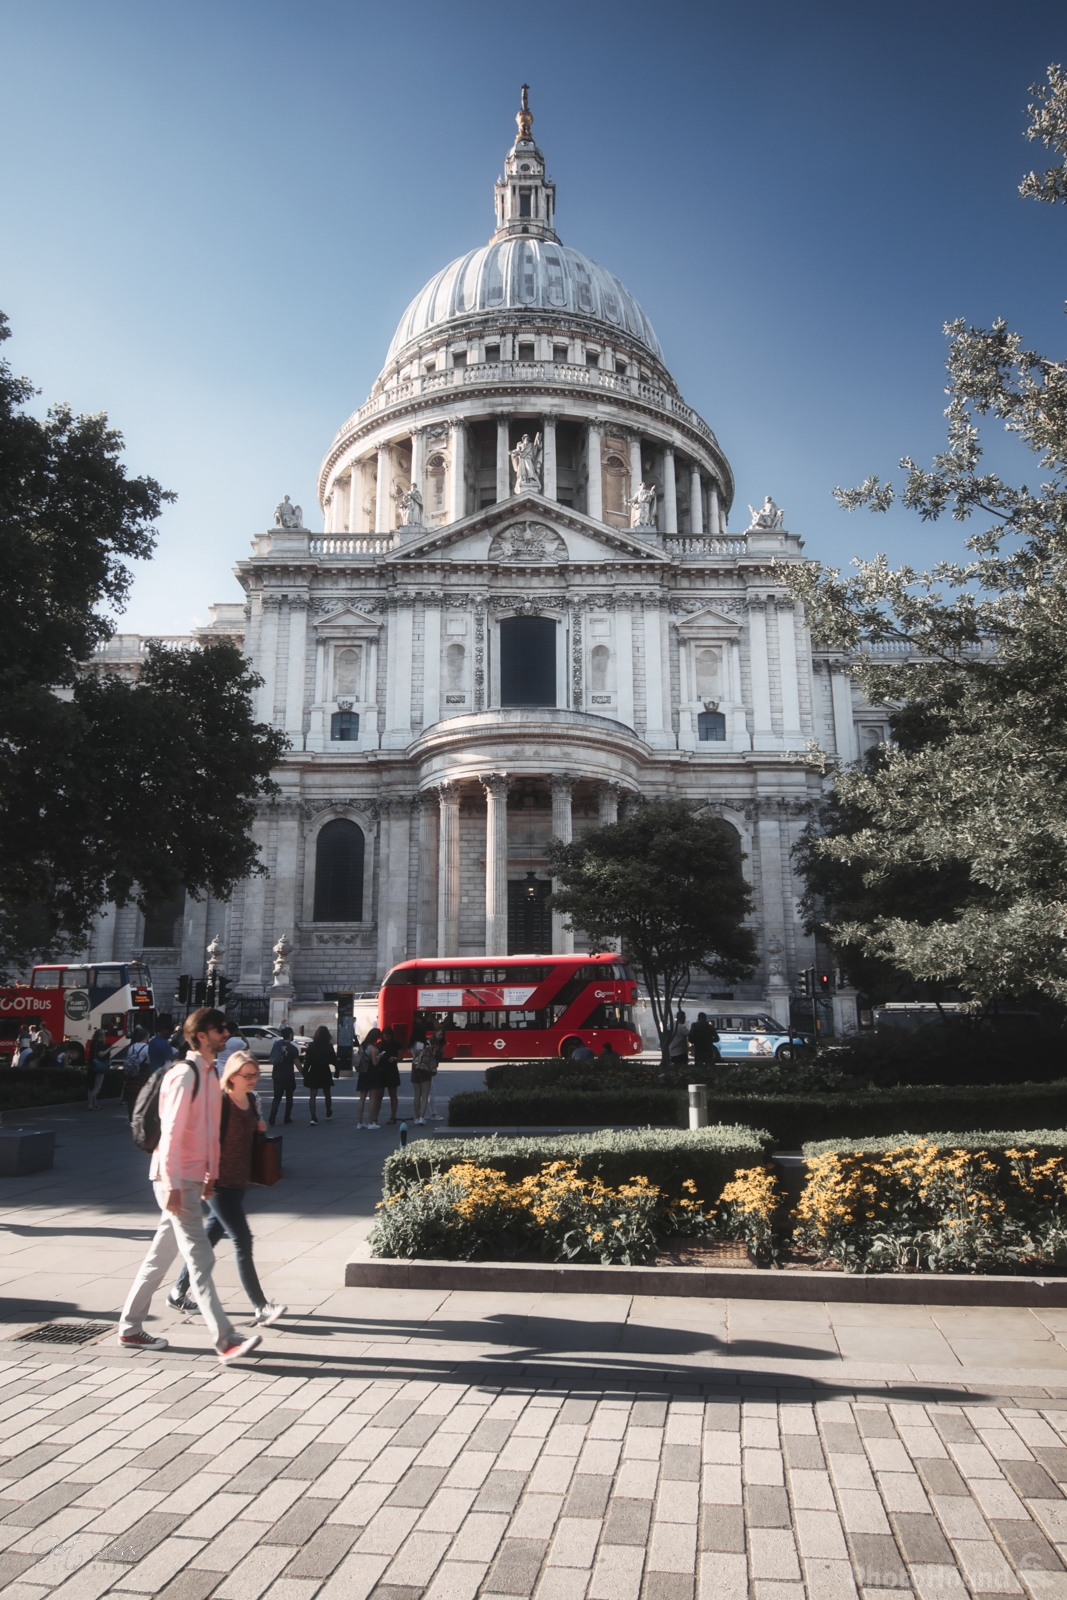 Image of Carter Lane Gardens - St Pauls Cathedral Viewpoint by Gert Lucas